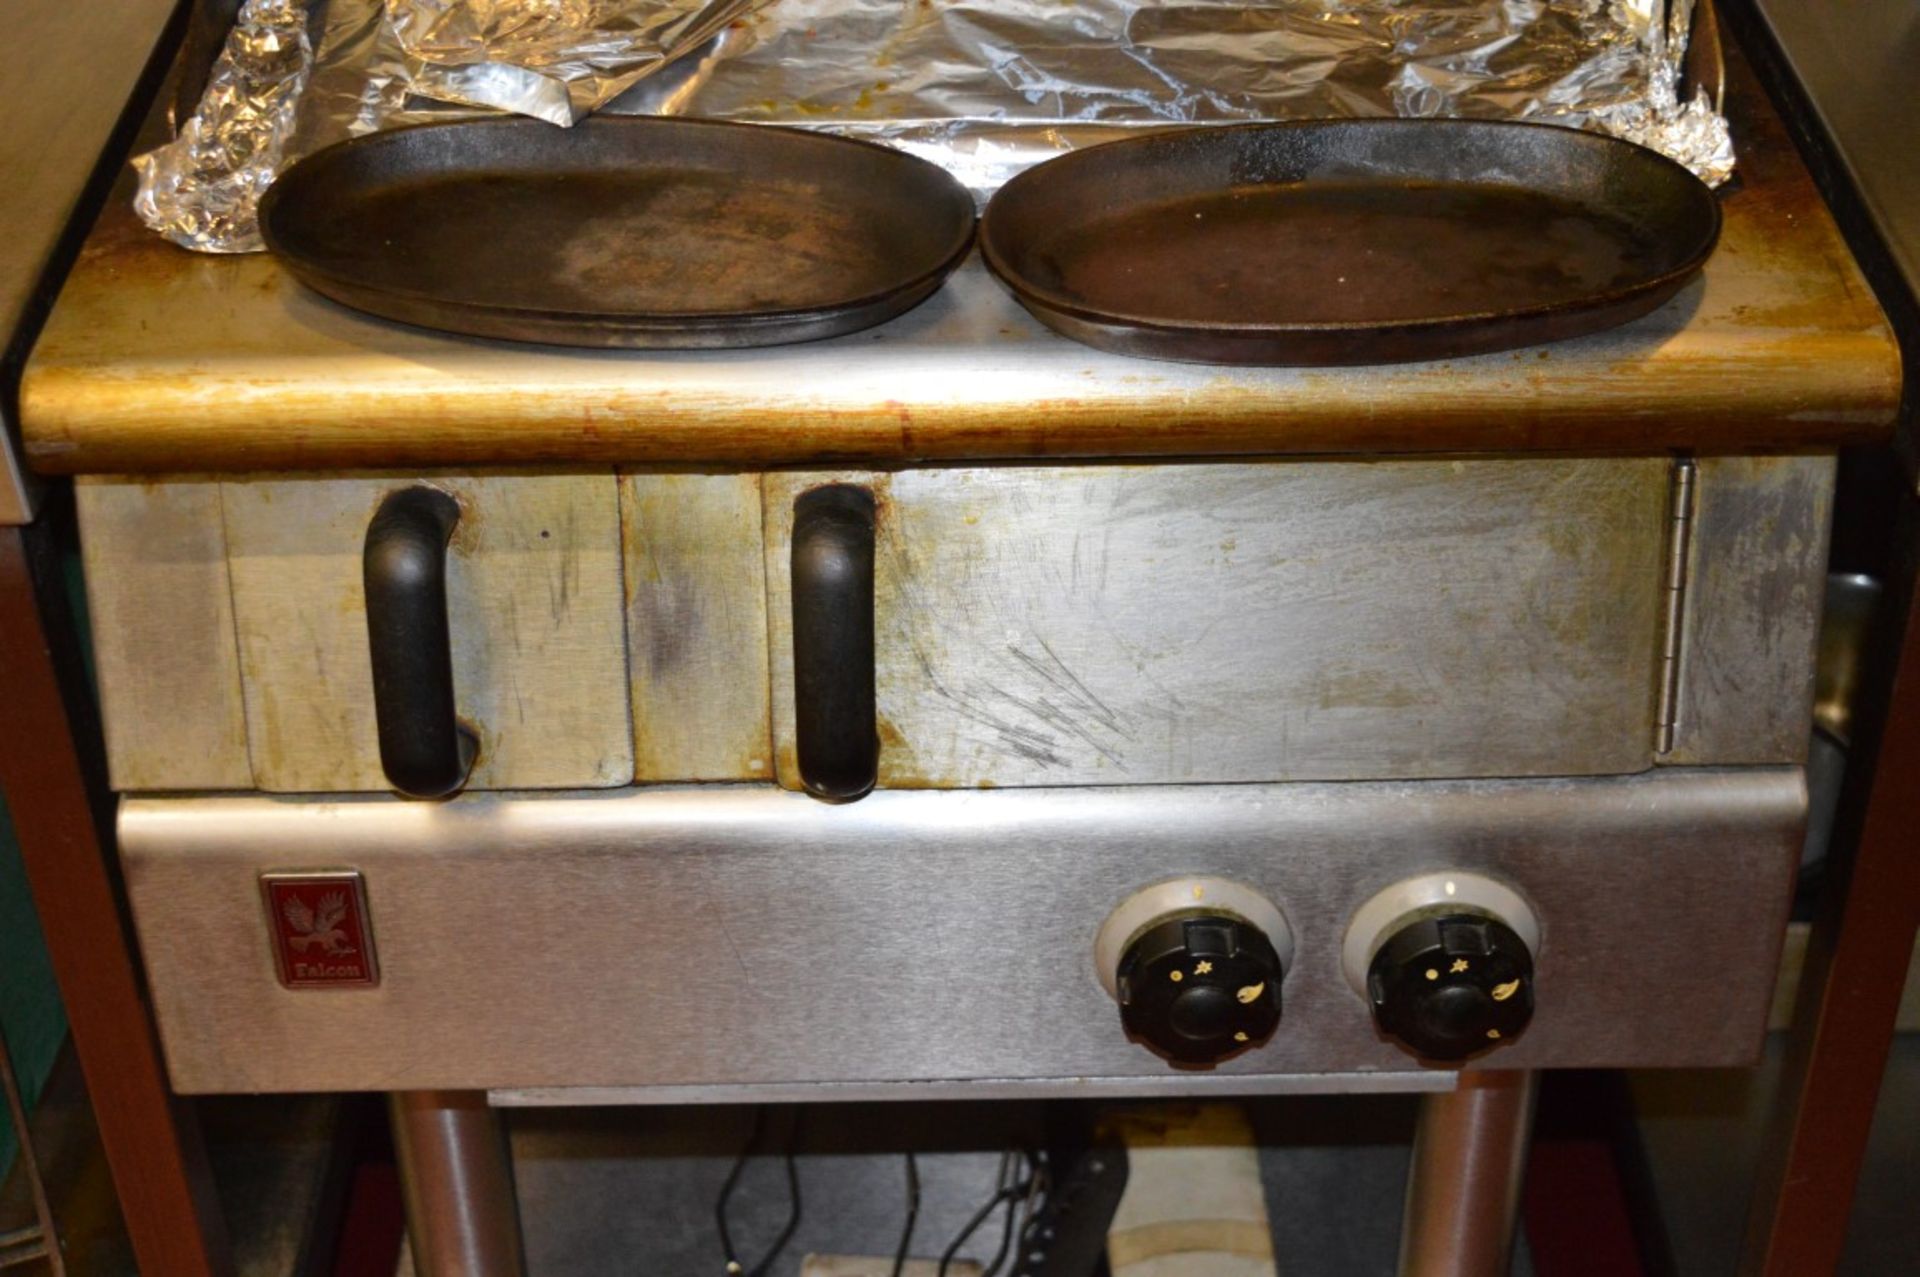 1 x Falcon Commercial Radiant Char Grill With Floor Stand - Gas 2 Burner - For Grilling Fish, Steaks - Image 3 of 5